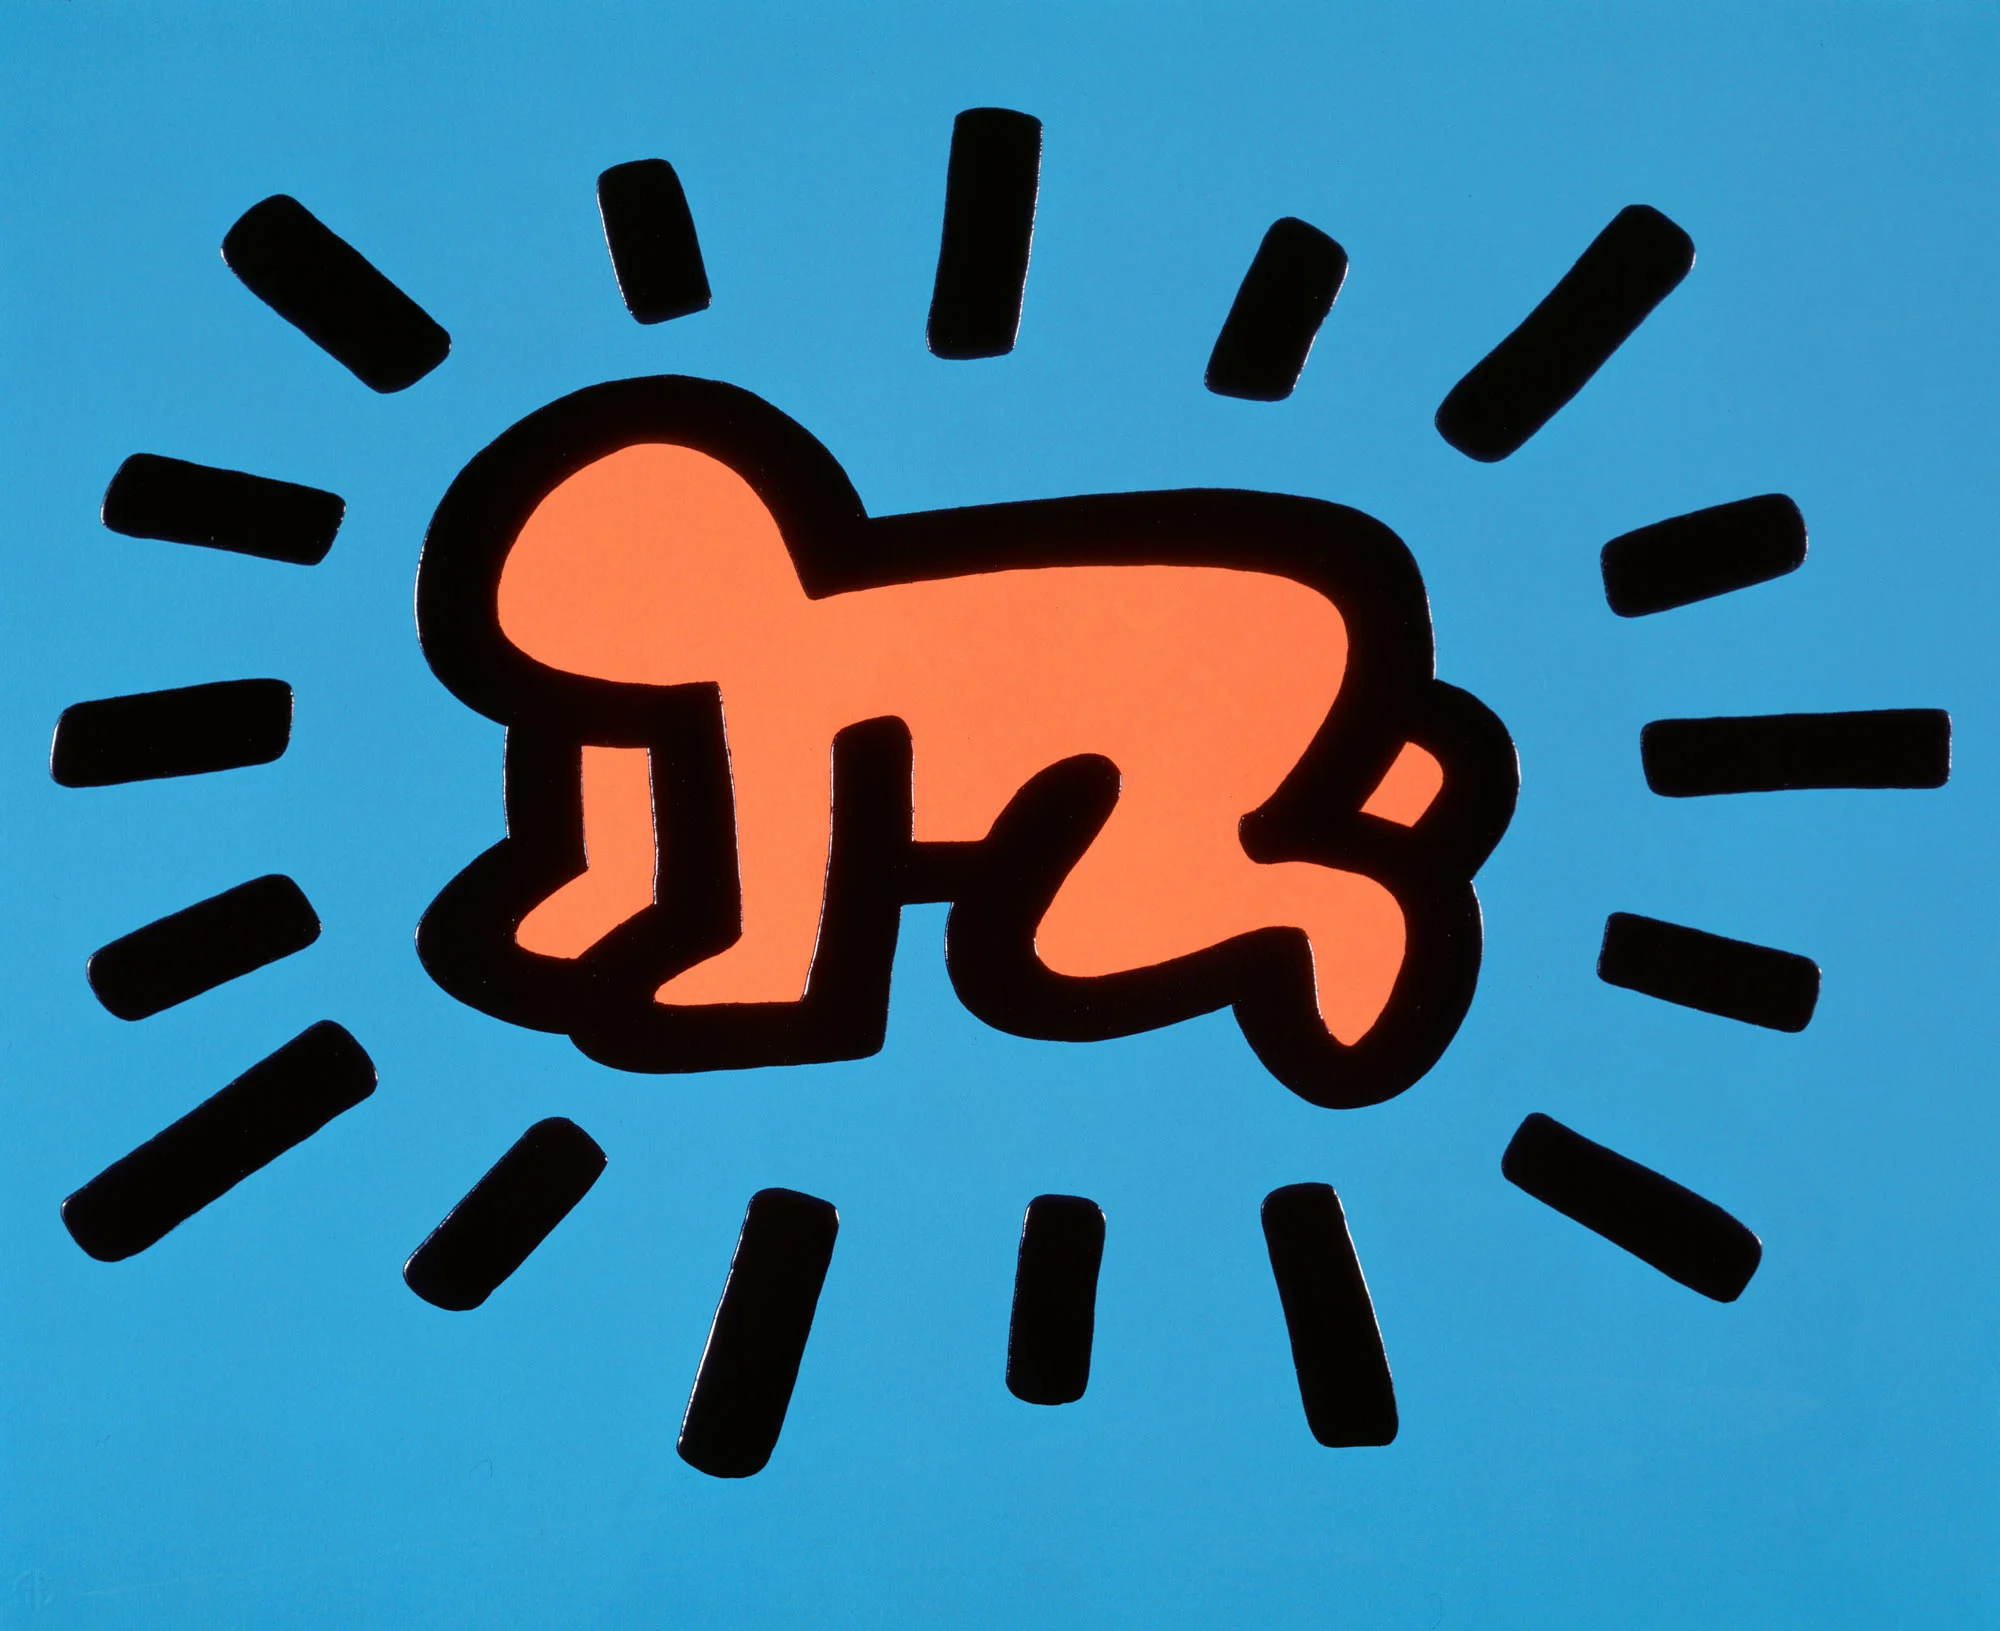 Untitled (from the Icons series), 1990 © Keith Haring Foundation